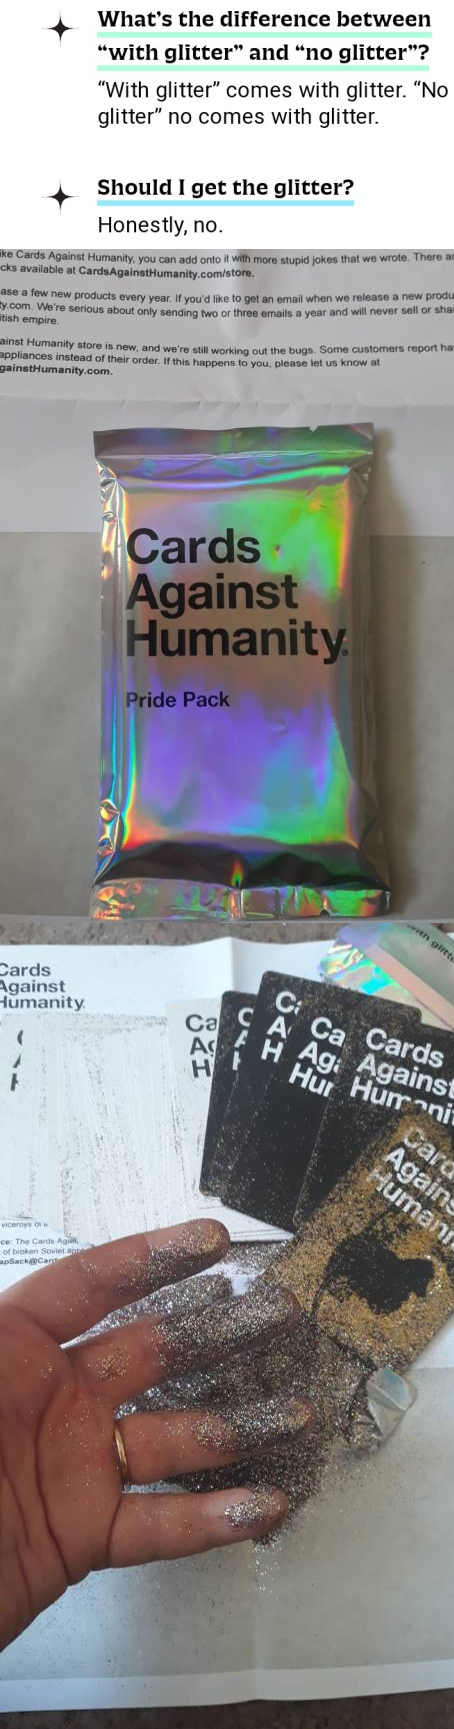 Cards+Against+Humanity+issued+a+Pride+pack%2C+complete+with+warning.